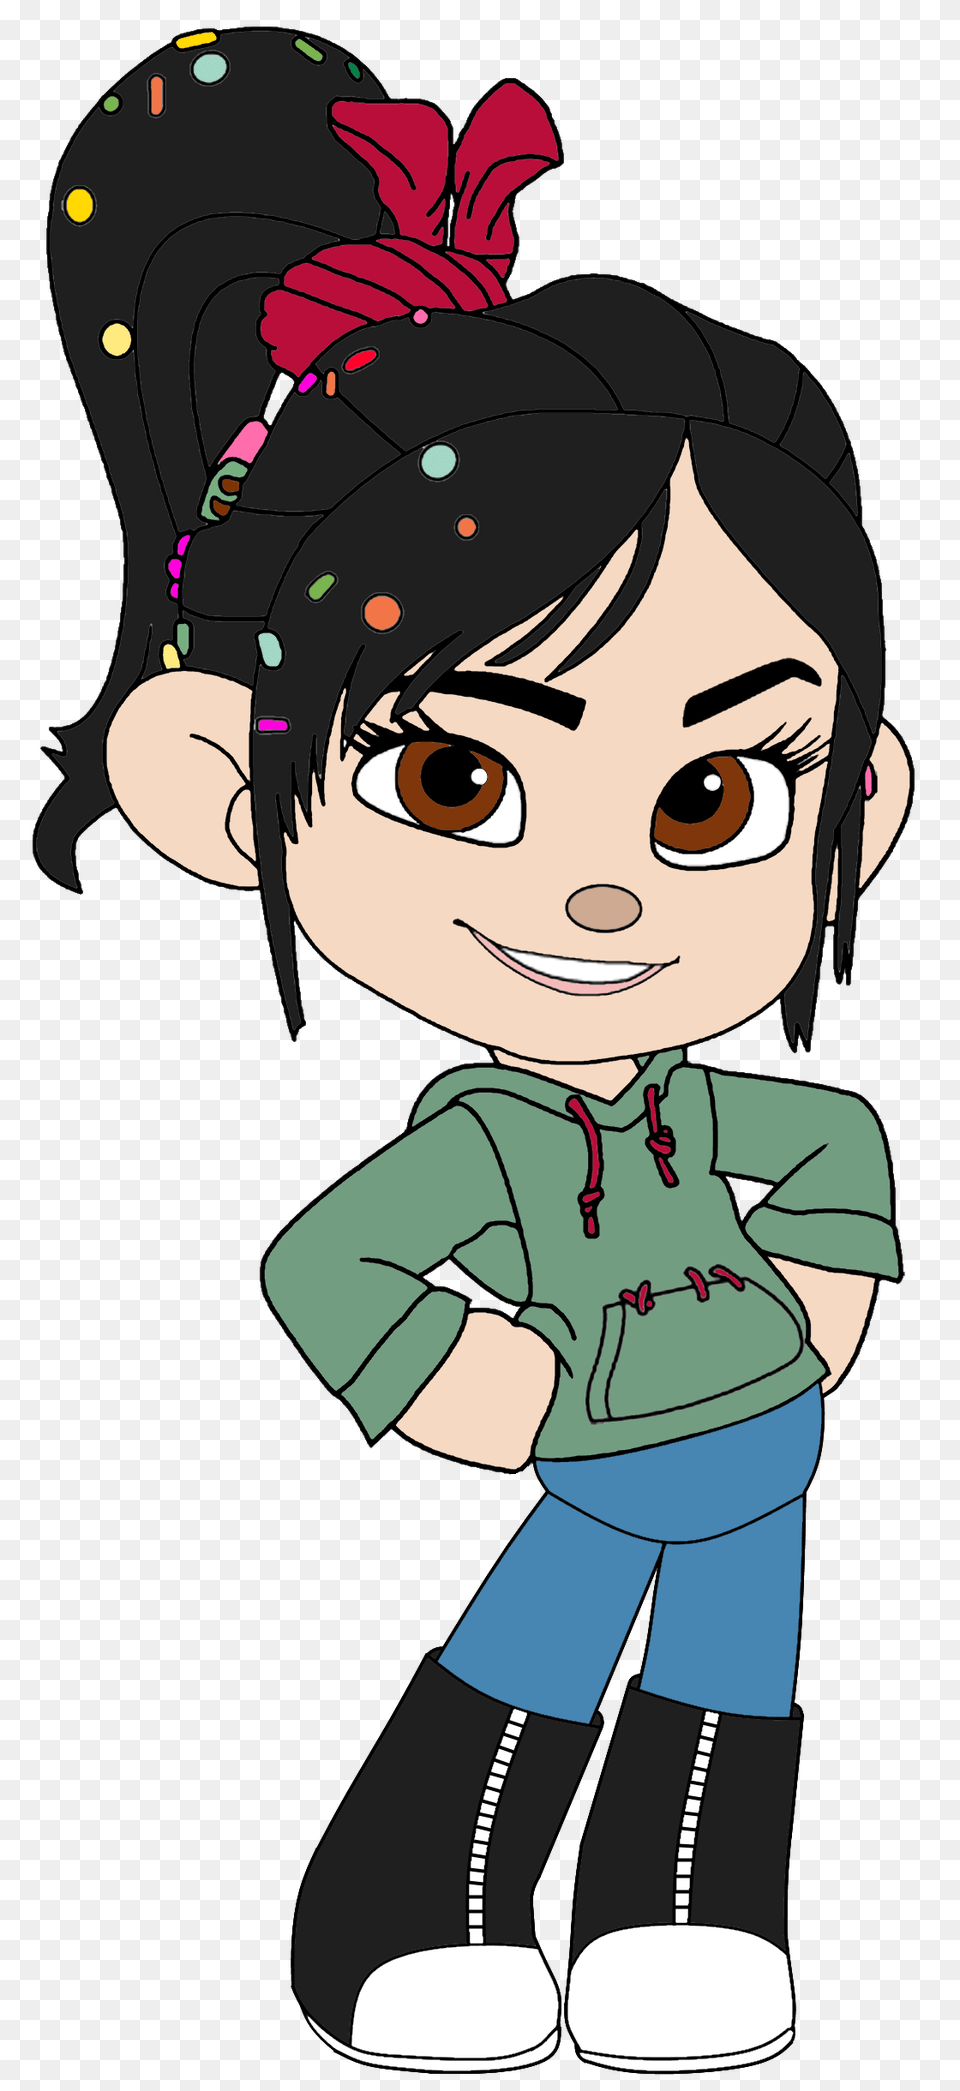 Disney Junior Vanellope In Jeans And Sneakers Hd Wallpaper, Book, Comics, Publication, Baby Free Transparent Png